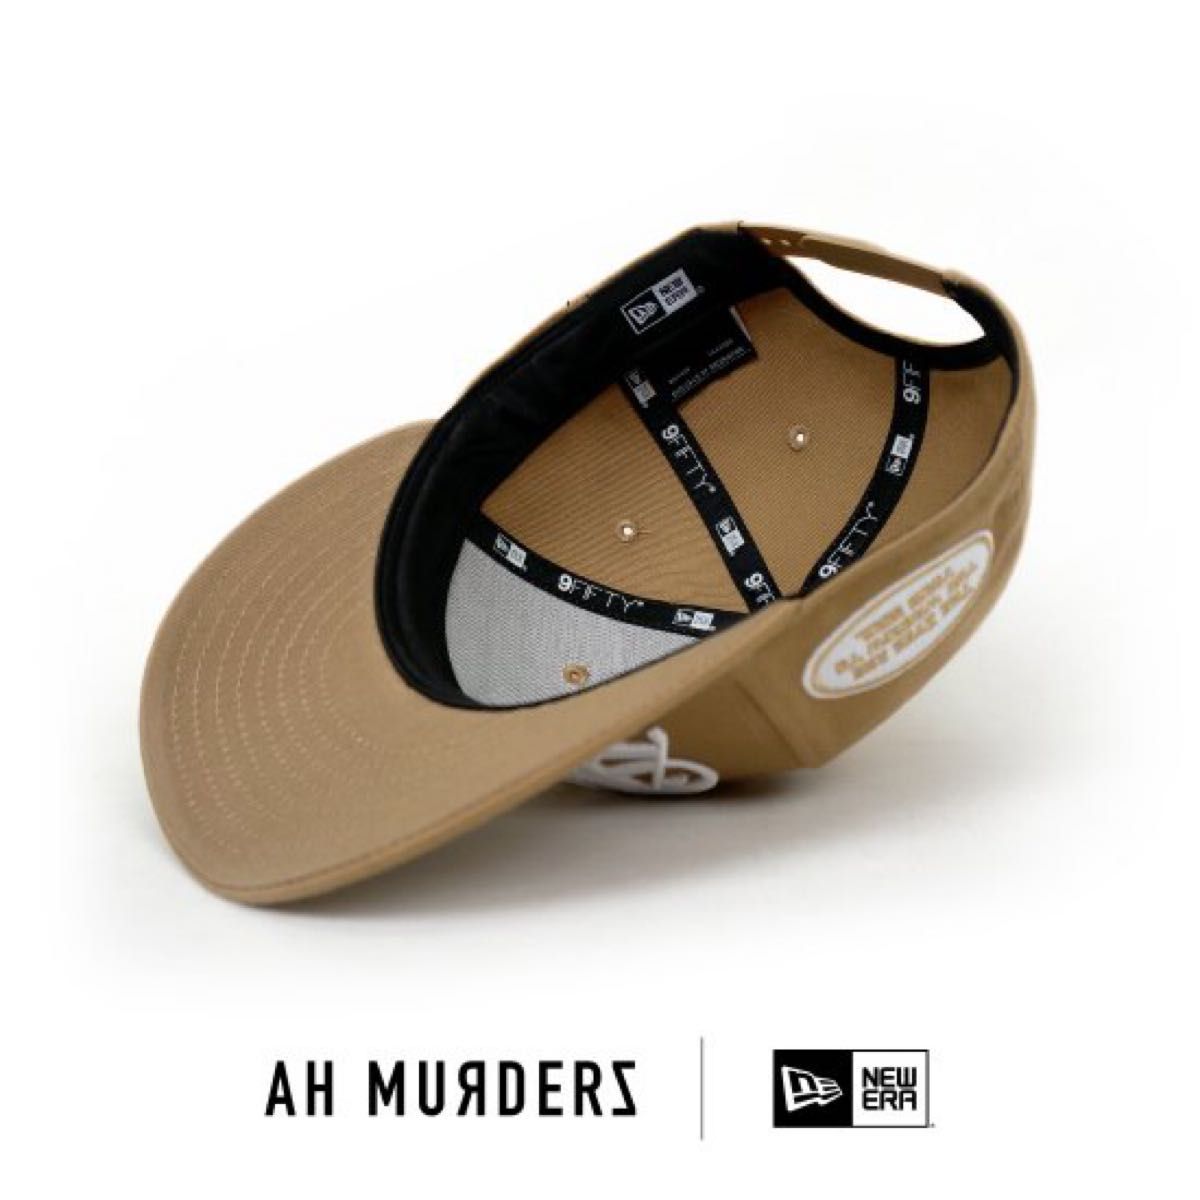 AH MURDERZ × NEWERA“ The eyes ” 9FIFTY LOW PROFILE limited100